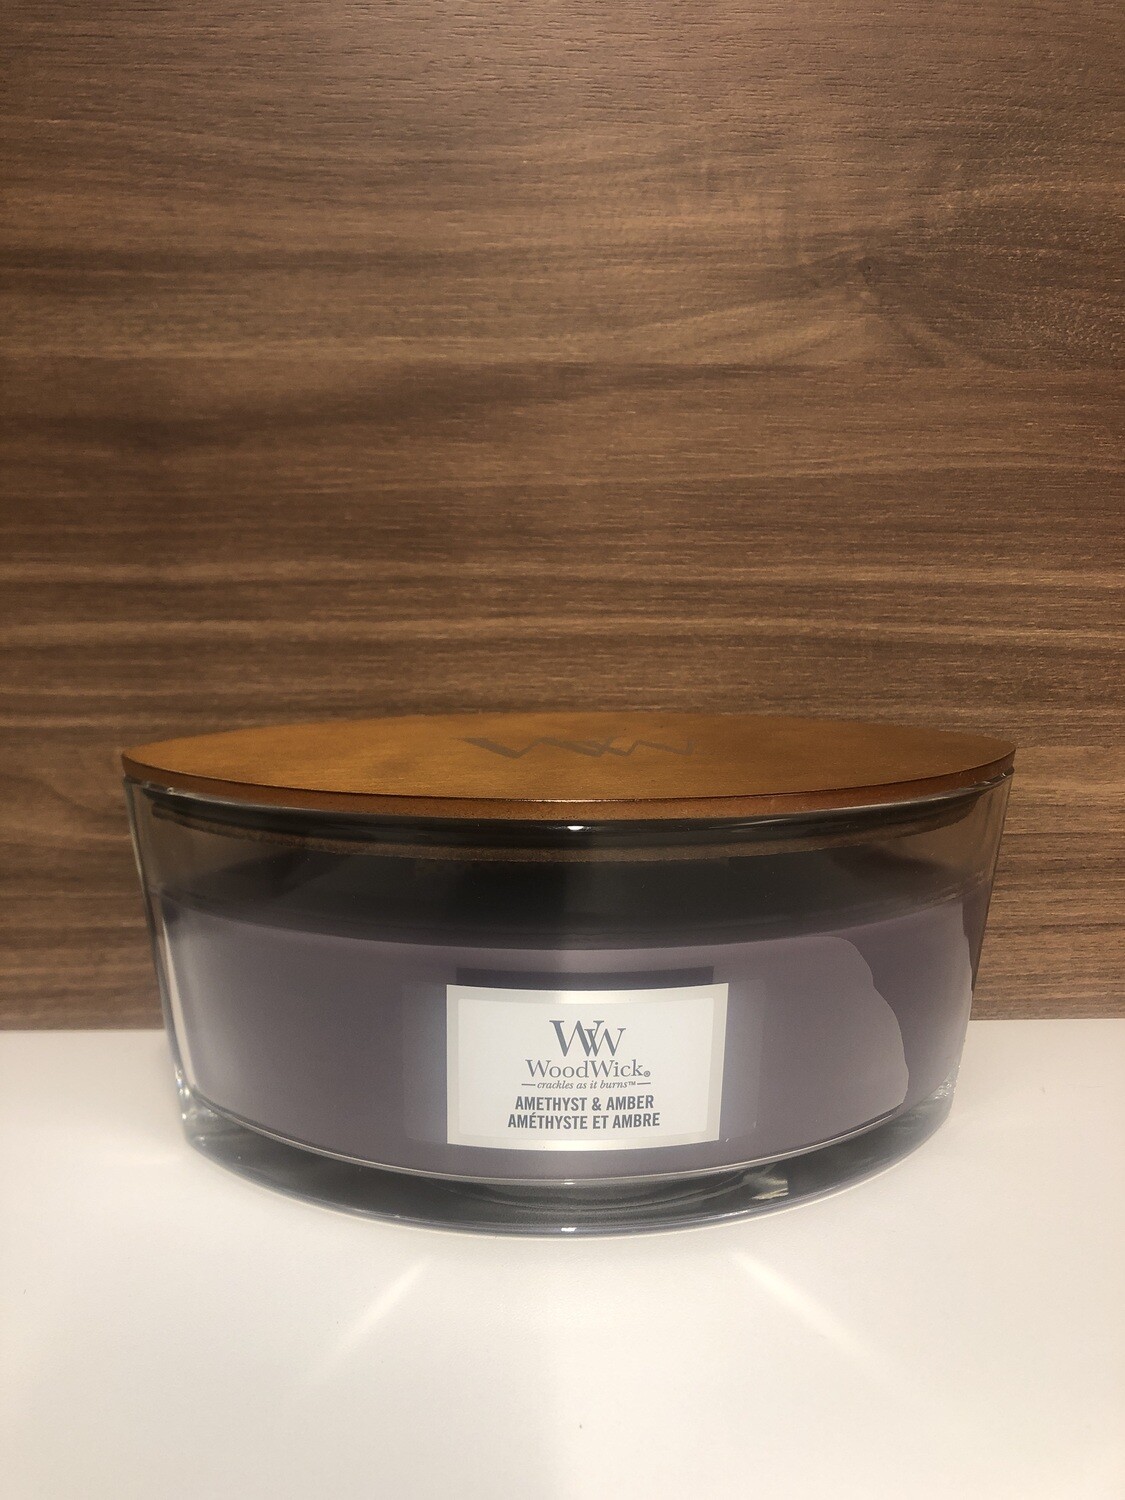 Woodwick ellipse Amethyst and Amber